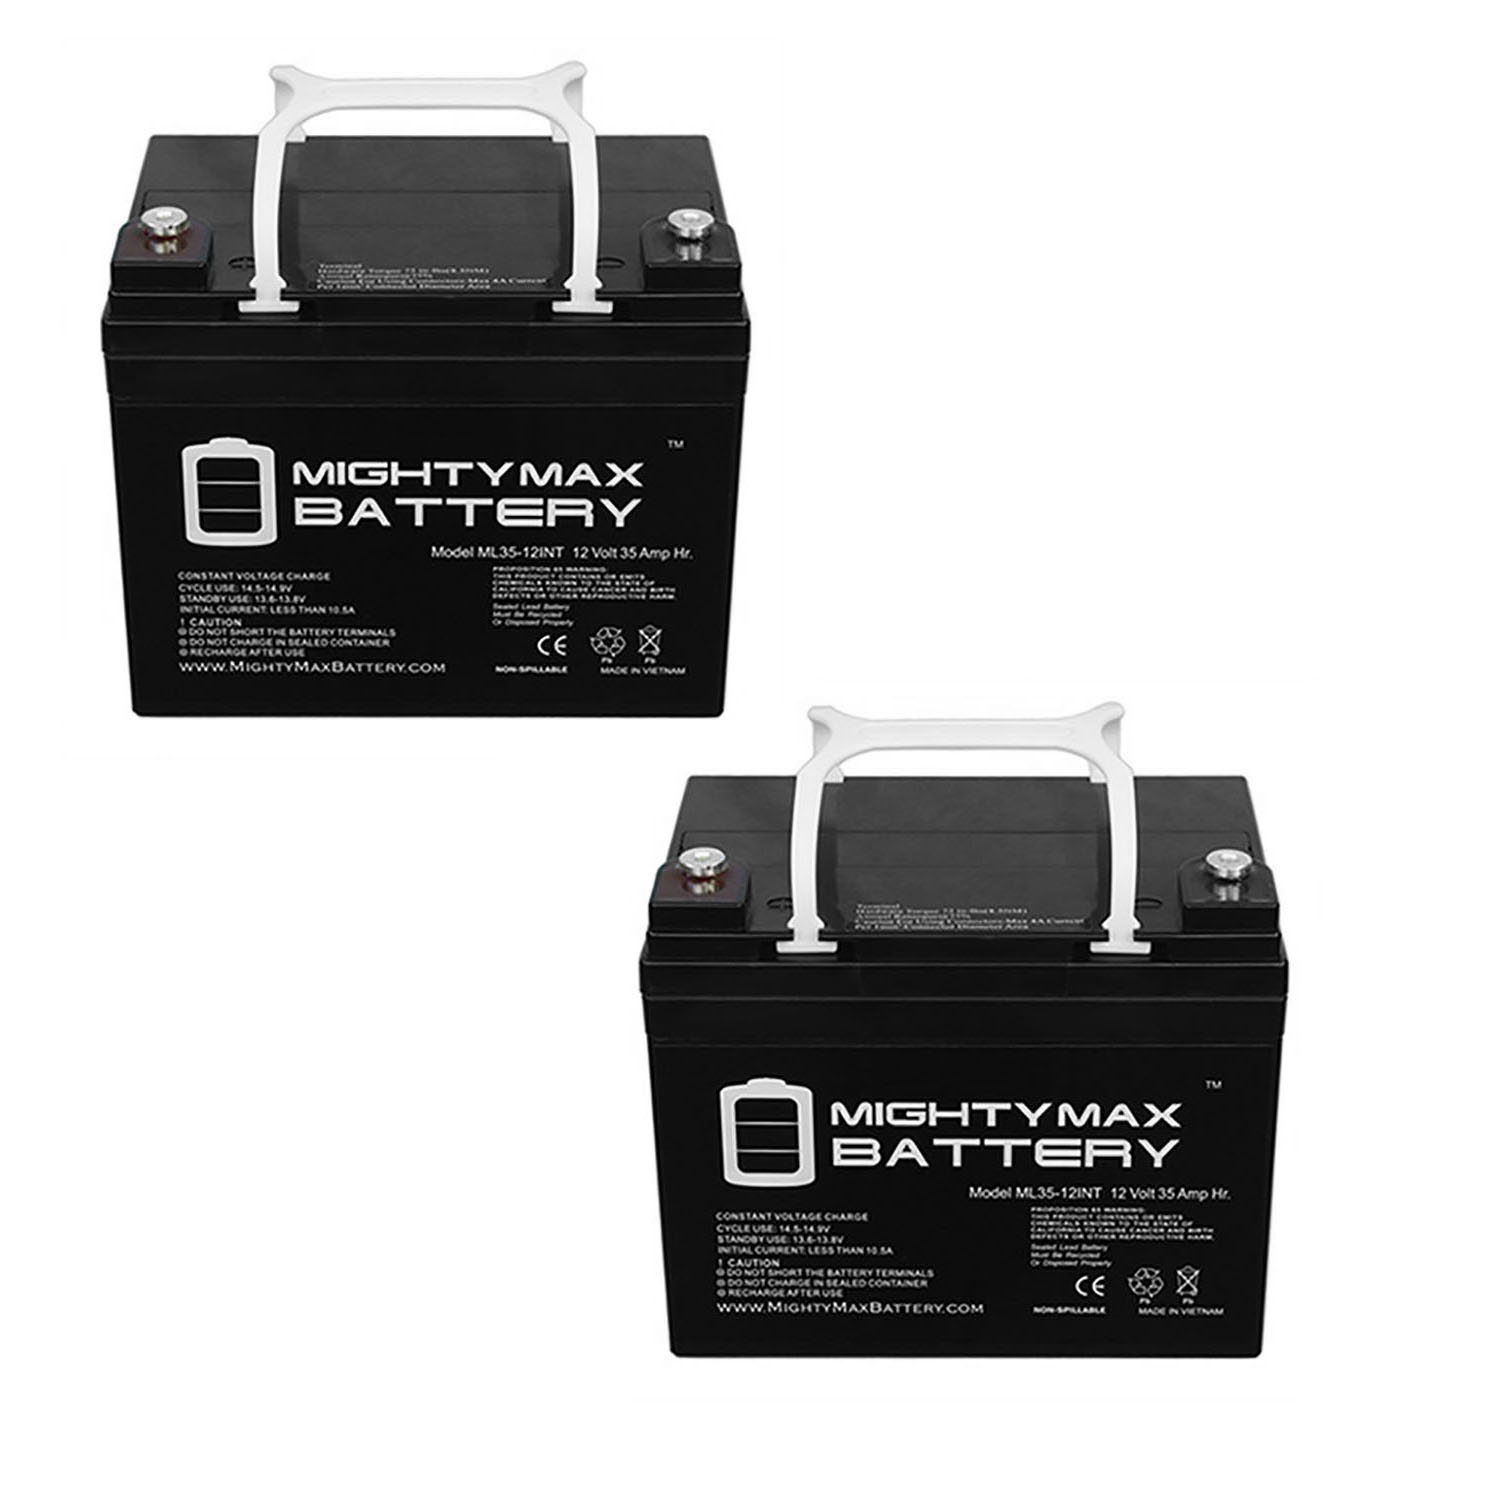 12V 35AH INT Replacement Battery for Cub Cadet 2000 - 2 Pack